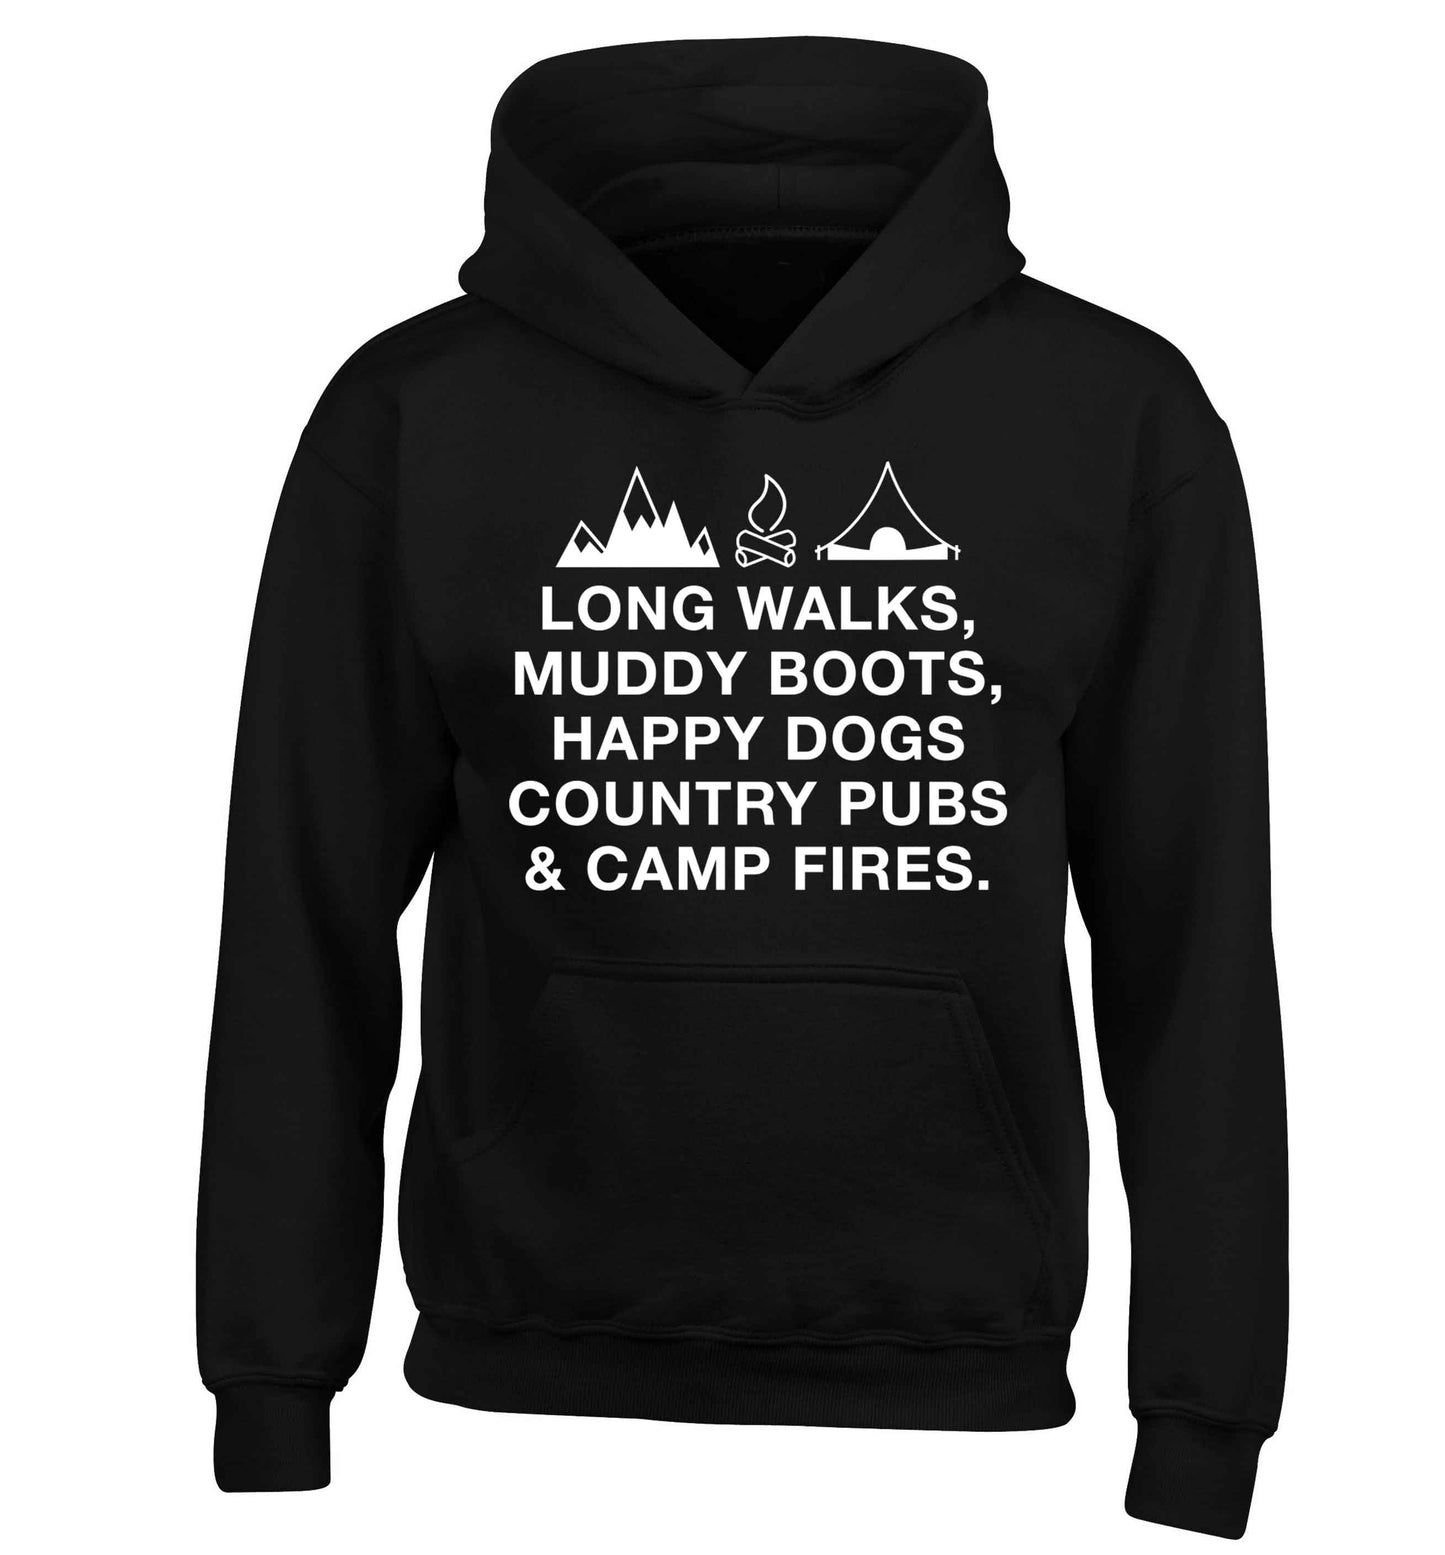 Long walks muddy boots happy dogs country pubs and camp fires children's black hoodie 12-13 Years